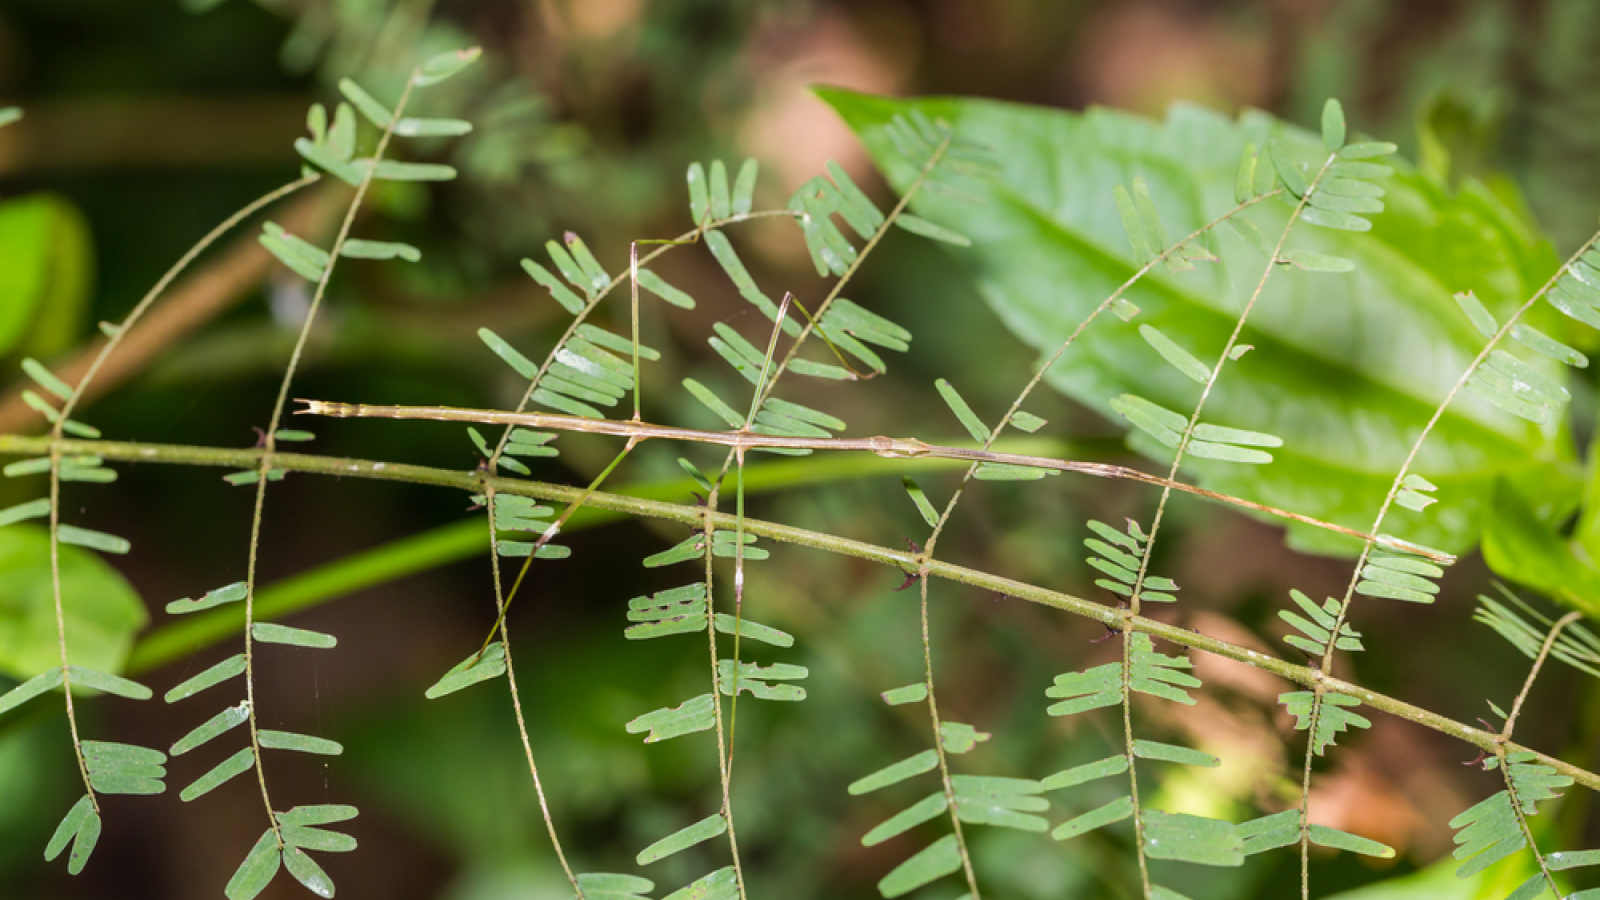 Close up photo of a stick insect on a plant.